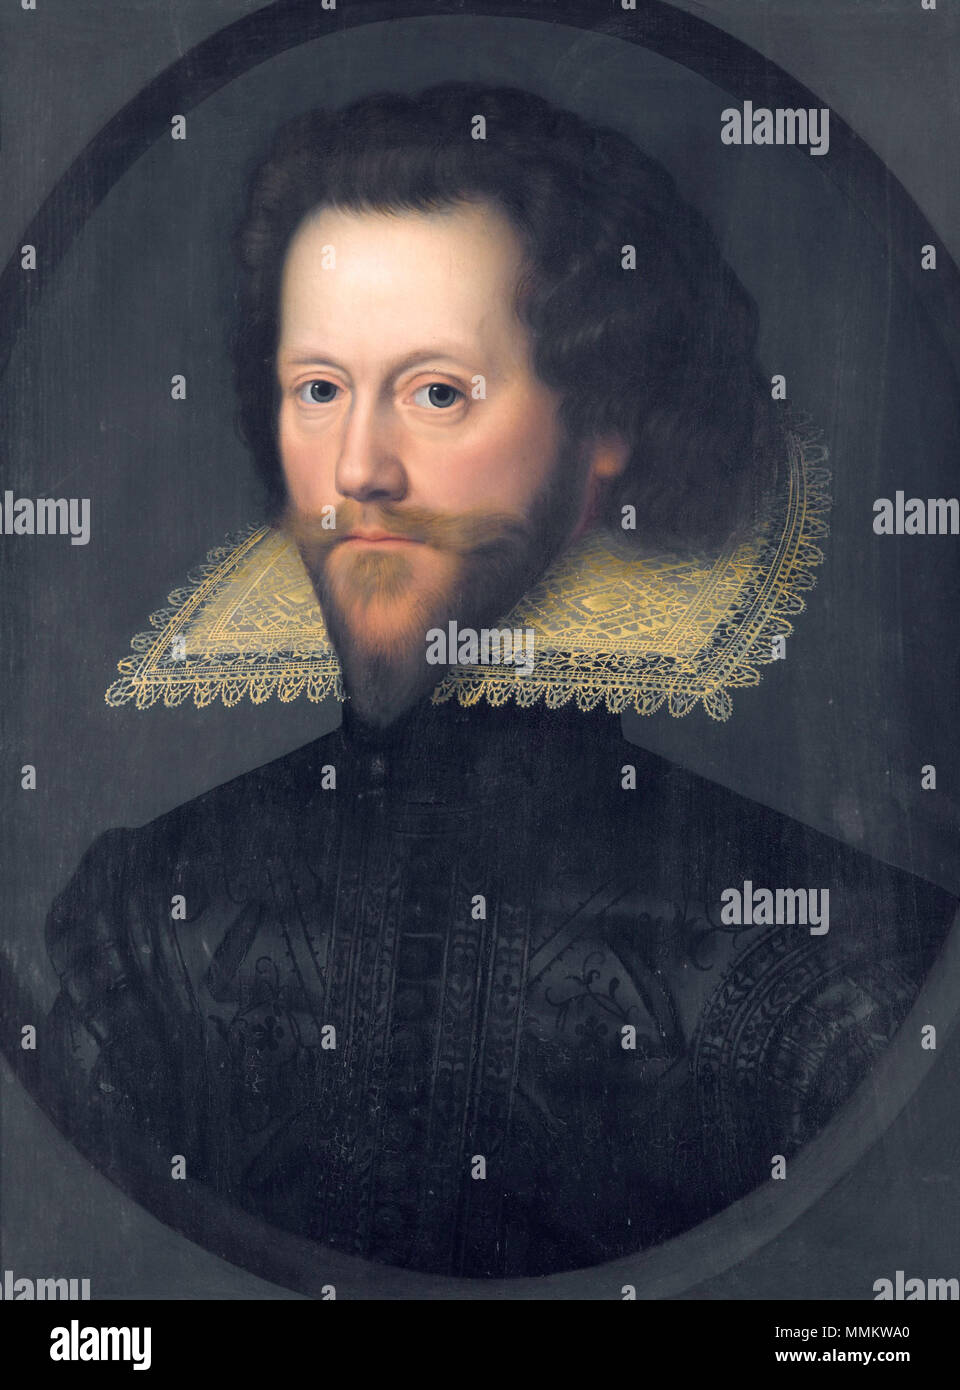 . English: Grey Brydges, 5th Baron Chandos (1578/9-1621) oil on panel 57 x 44 cm inscribed verso: Lord  /  Grey  /  Scandis,  and  on  an  old  label:  Grey  Lord  Chandos  son  of  William  Lord  Chandos  /  &  Mary  daughter  of  Sr.  Owen  Hopton  Kt.  &  sister  /  to  Anne  Countess  of  Downe.  Oct.  An:  1621   Grey Brydges, 5th Baron Chandos (1578/9-1621)  *oil on panel  *57 x 44 cm  *inscribed verso: Lord  /  Grey  /  Scandis,  and  on  an  old  label:  Grey  Lord  Chandos  son  of  William  Lord  Chandos  /  &  Mary  daughter  of  Sr.  Owen  Hopton  Kt.  &  sister  /  to  Anne  Count Stock Photo